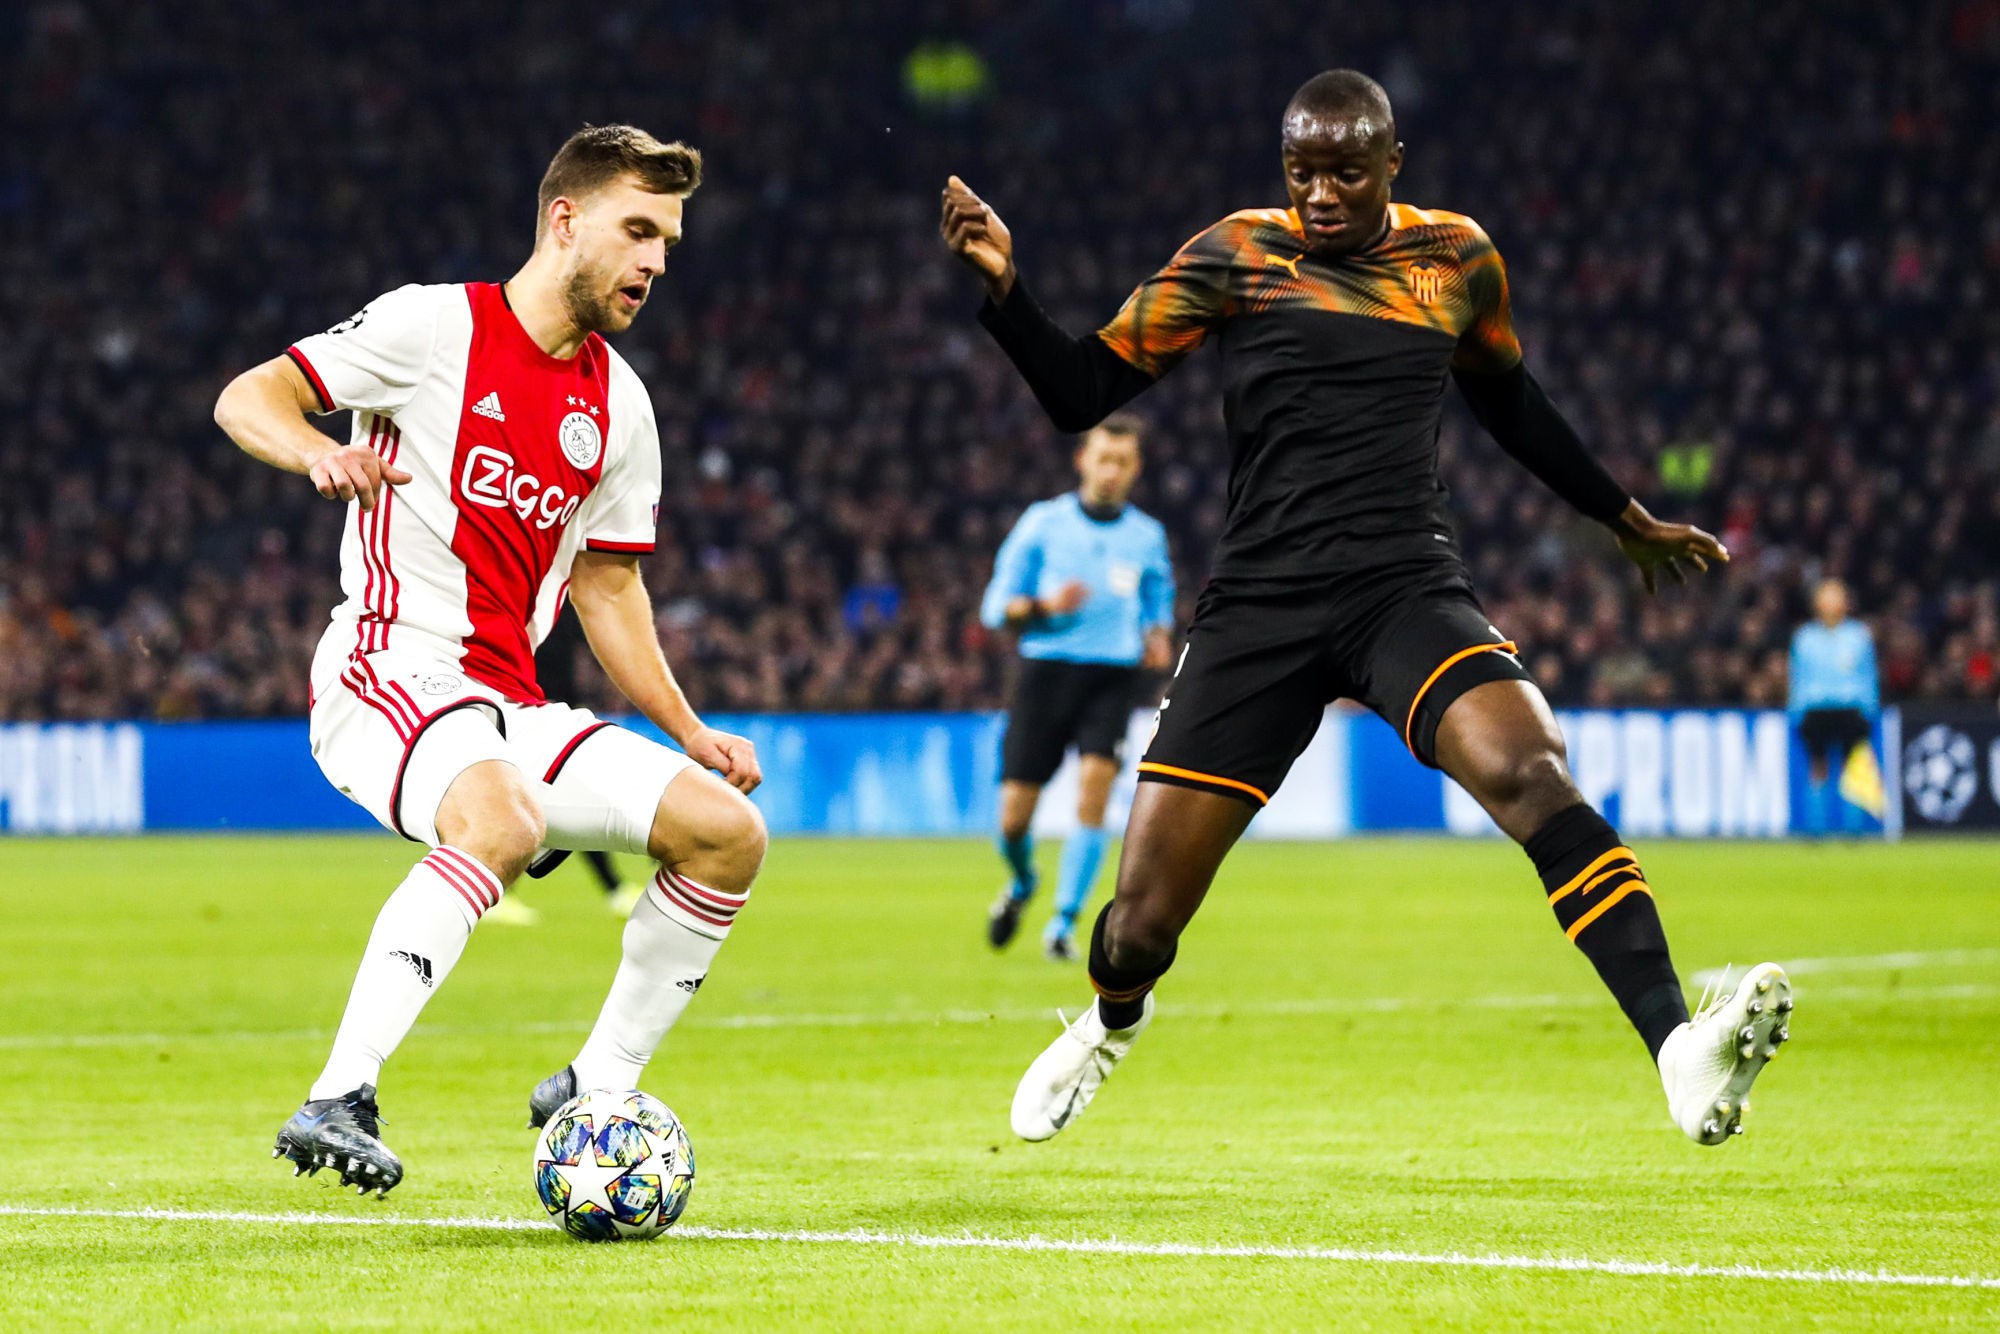 (l-r) Joel Veltman of Ajax, Mouctar Diakhaby of Valencia CF during the UEFA Champions League group H match between Ajax Amsterdam and Valencia CF at the Johan Cruijff Arena on December 11, 2019 in Amsterdam, The Netherlands 
Photo by Icon Sport - Joel VELTMAN - Mouctar DIAKHABY - Johan Cruijff Arena - Amsterdam (Pays Bas)